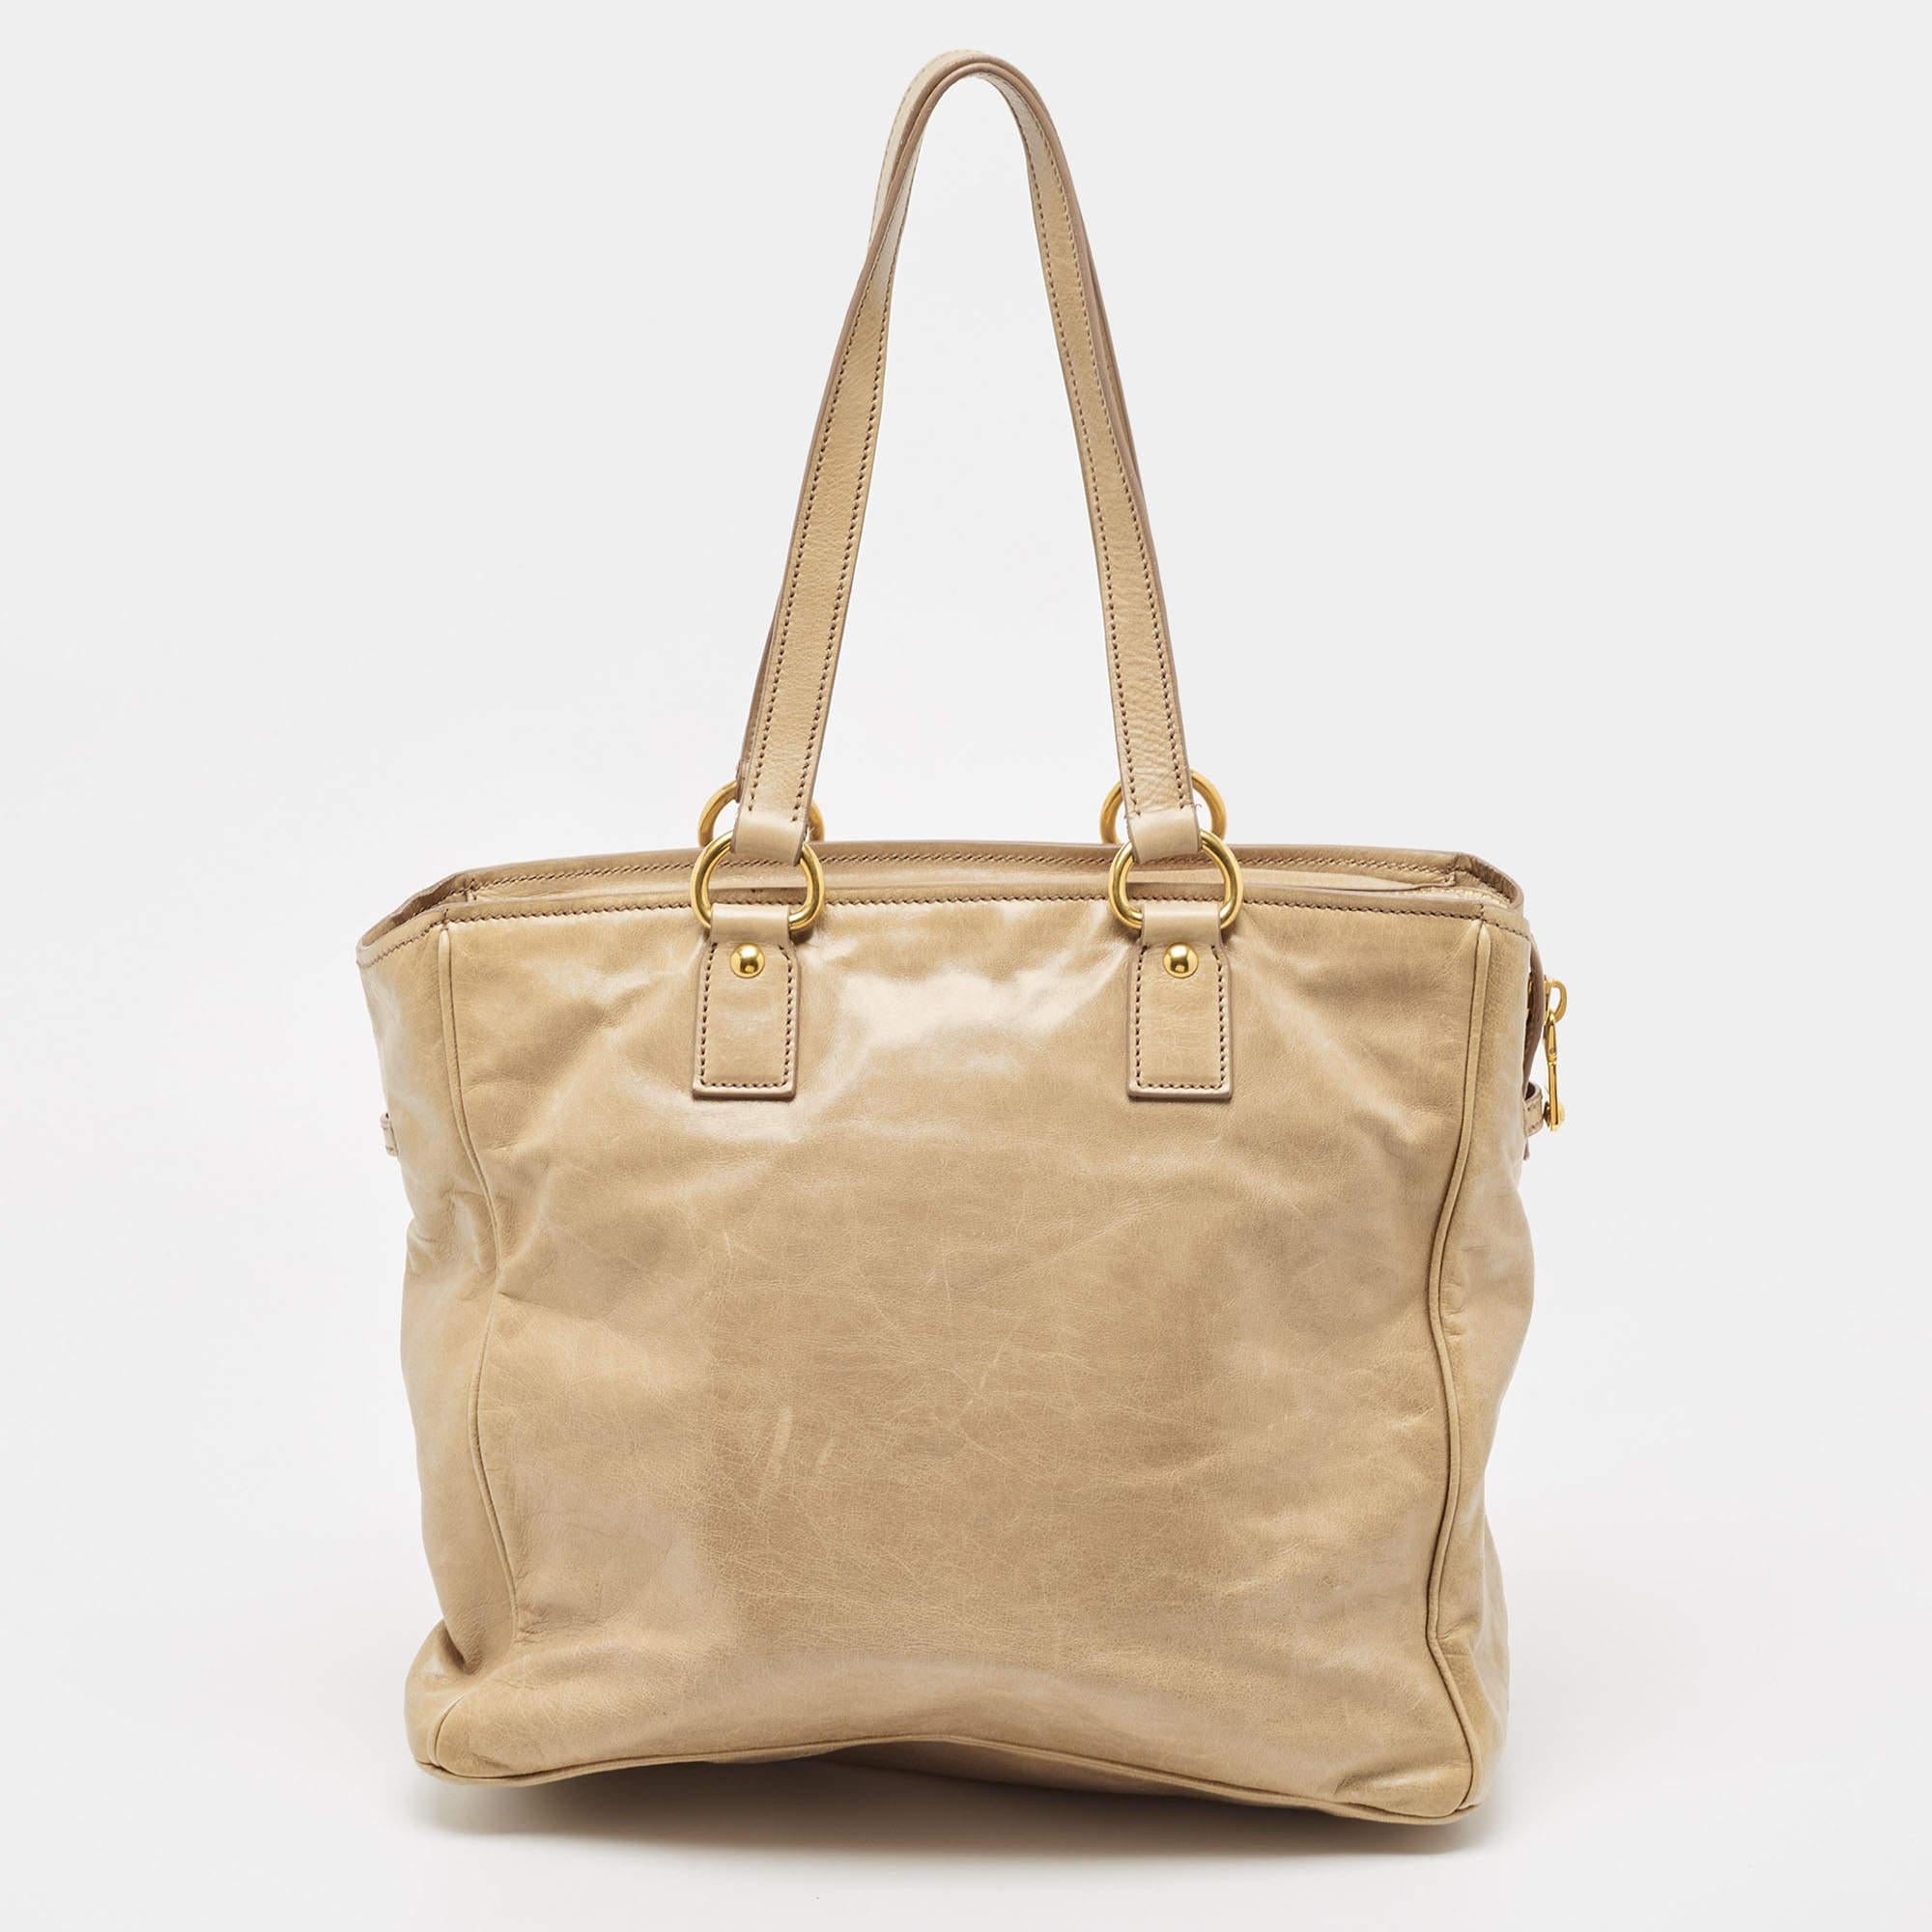 Miu Miu Beige Leather Front Pocket Tote For Sale 8